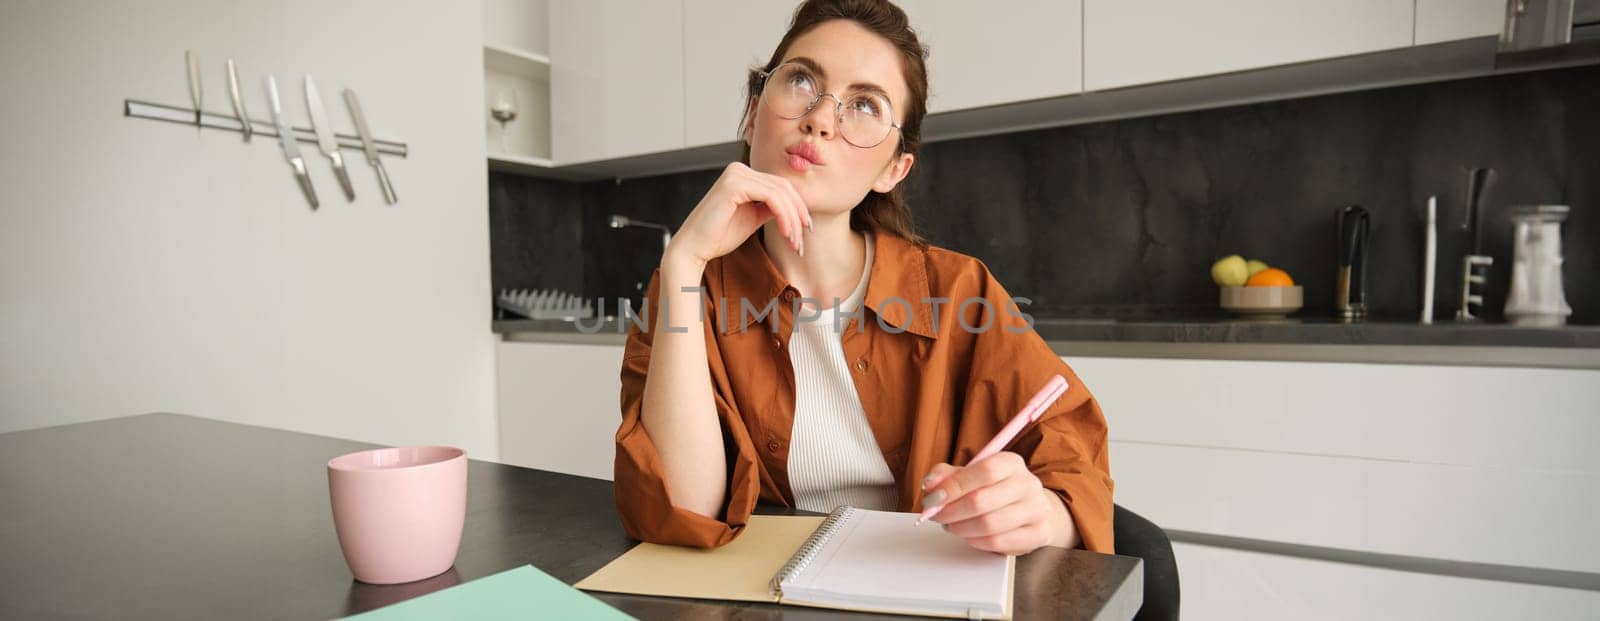 Portrait of woman thinking, sitting kitchen, holding pen, writing with thoughtful face, creative girl pondering over her project, making notes.